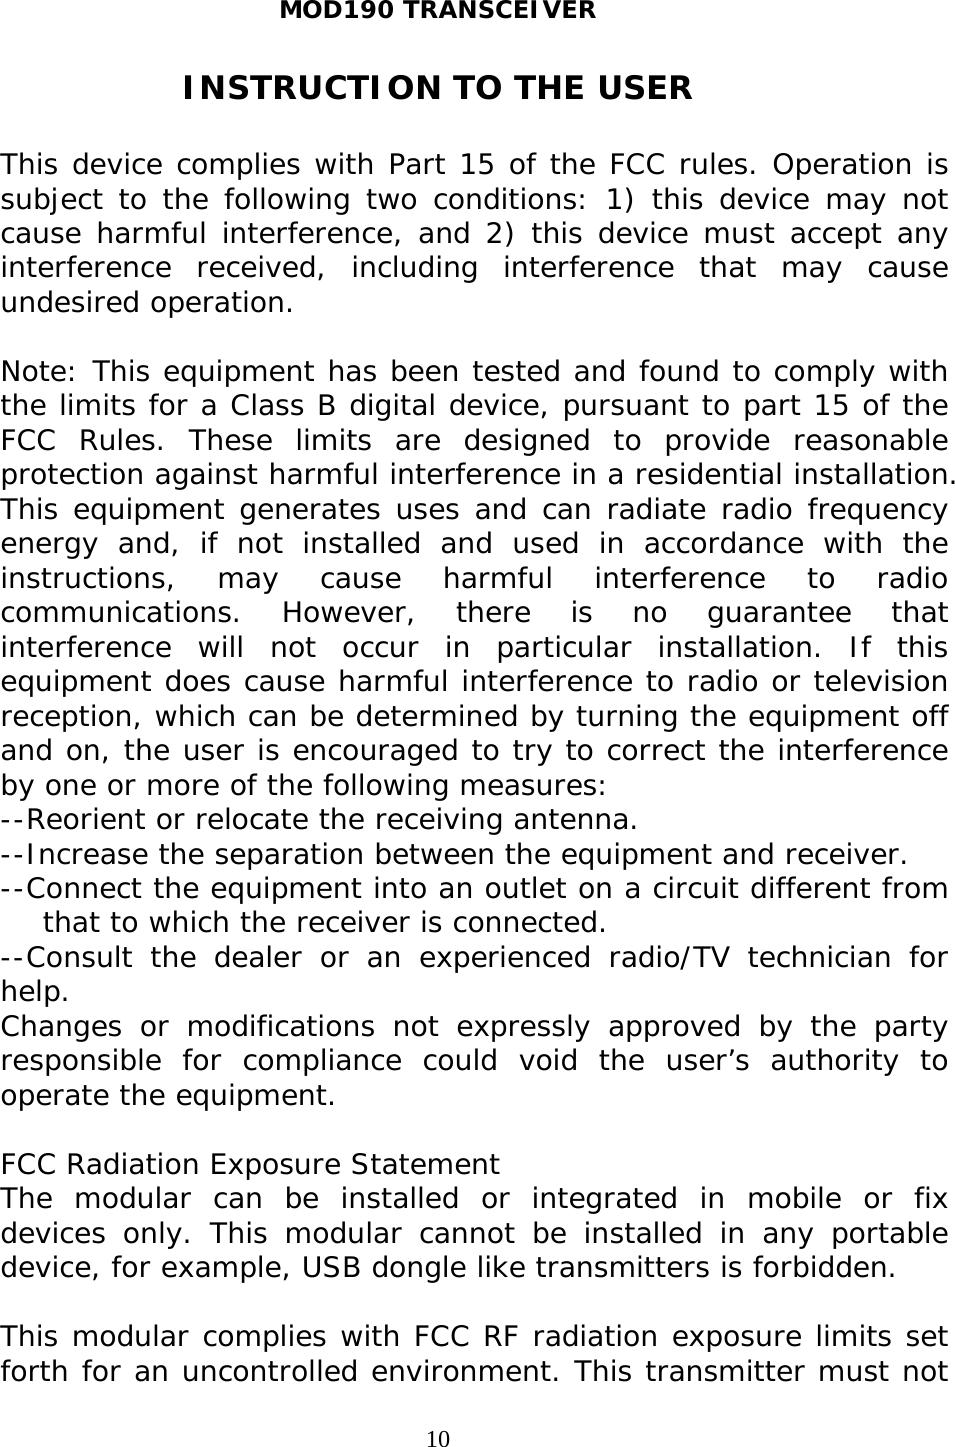 MOD190 TRANSCEIVER  10INSTRUCTION TO THE USER  This device complies with Part 15 of the FCC rules. Operation is subject to the following two conditions: 1) this device may not cause harmful interference, and 2) this device must accept any interference received, including interference that may cause undesired operation.  Note: This equipment has been tested and found to comply with the limits for a Class B digital device, pursuant to part 15 of the FCC Rules. These limits are designed to provide reasonable protection against harmful interference in a residential installation. This equipment generates uses and can radiate radio frequency energy and, if not installed and used in accordance with the instructions, may cause harmful interference to radio communications. However, there is no guarantee that interference will not occur in particular installation. If this equipment does cause harmful interference to radio or television reception, which can be determined by turning the equipment off and on, the user is encouraged to try to correct the interference by one or more of the following measures: --Reorient or relocate the receiving antenna. --Increase the separation between the equipment and receiver. --Connect the equipment into an outlet on a circuit different from that to which the receiver is connected. --Consult the dealer or an experienced radio/TV technician for help. Changes or modifications not expressly approved by the party responsible for compliance could void the user’s authority to operate the equipment.  FCC Radiation Exposure Statement The modular can be installed or integrated in mobile or fix devices only. This modular cannot be installed in any portable device, for example, USB dongle like transmitters is forbidden.  This modular complies with FCC RF radiation exposure limits set forth for an uncontrolled environment. This transmitter must not 